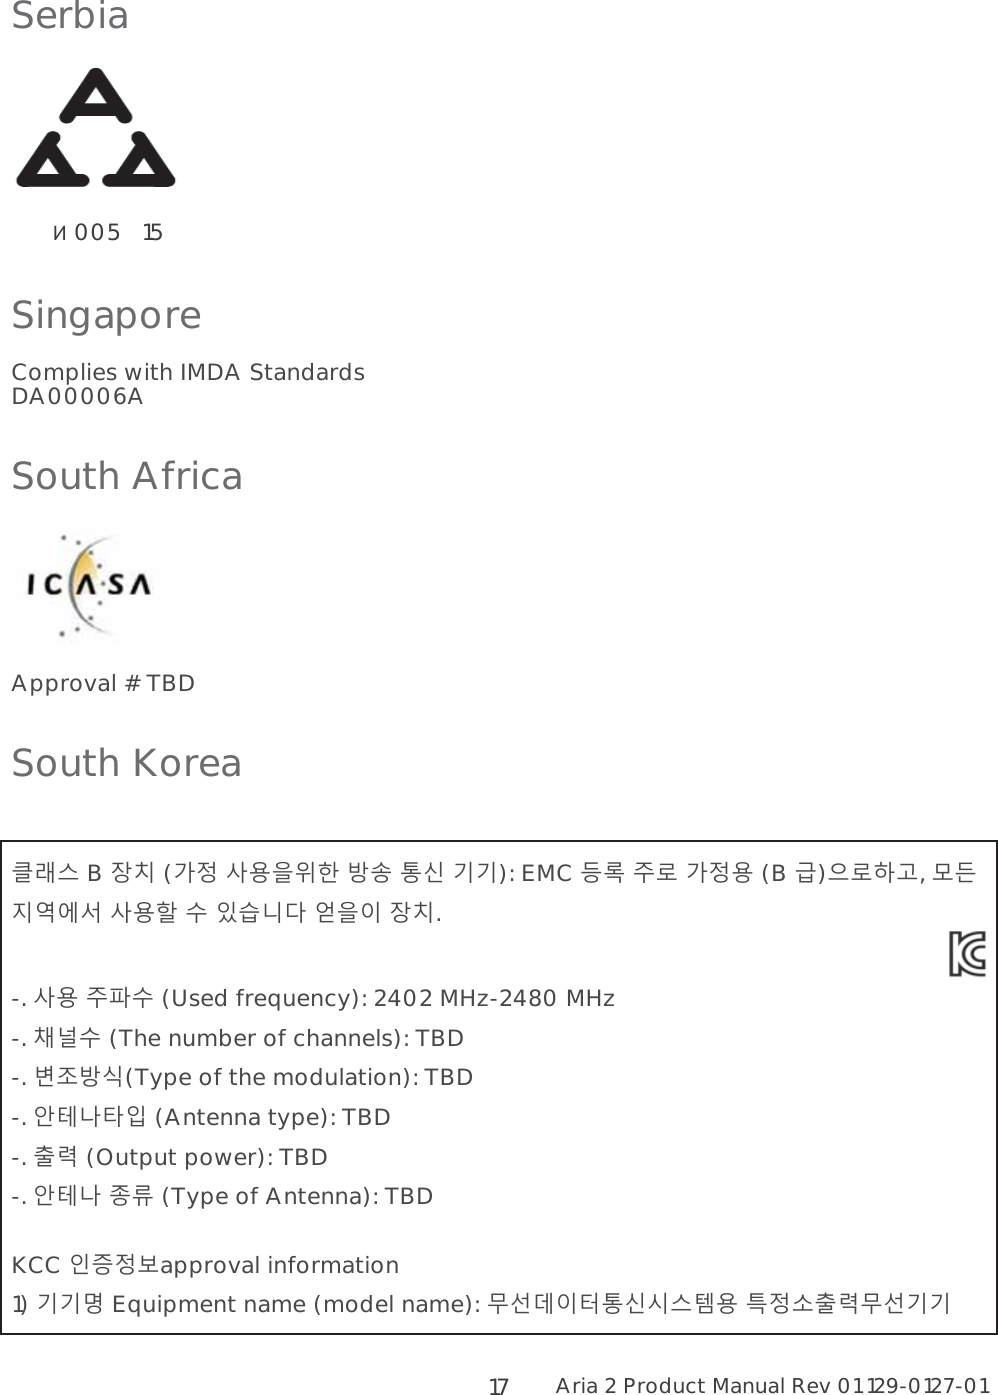 Aria 2 Product Manual Rev 01 129-0127-01  17 Serbia         005   15 Singapore Complies with IMDA Standards DA00006A South Africa  Approval # TBD South Korea  A# B 6@ (7 ,0.J ! F&apos; ): EMC  ; 7, (B )/I,  =+* ,K &quot; 4$ )01 6@.  -. , ;H&quot; (Used frequency): 2402 MHz-2480 MHz -. &gt;&quot; (The number of channels): TBD -. 9&amp;(Type of the modulation): TBD -. (DB3 (Antenna type): TBD -. ? (Output power): TBD -. (D : (Type of Antenna): TBD  KCC 2&lt;7approval information 1)  Equipment name (model name): 1CF&apos;%#E, G7 ? 